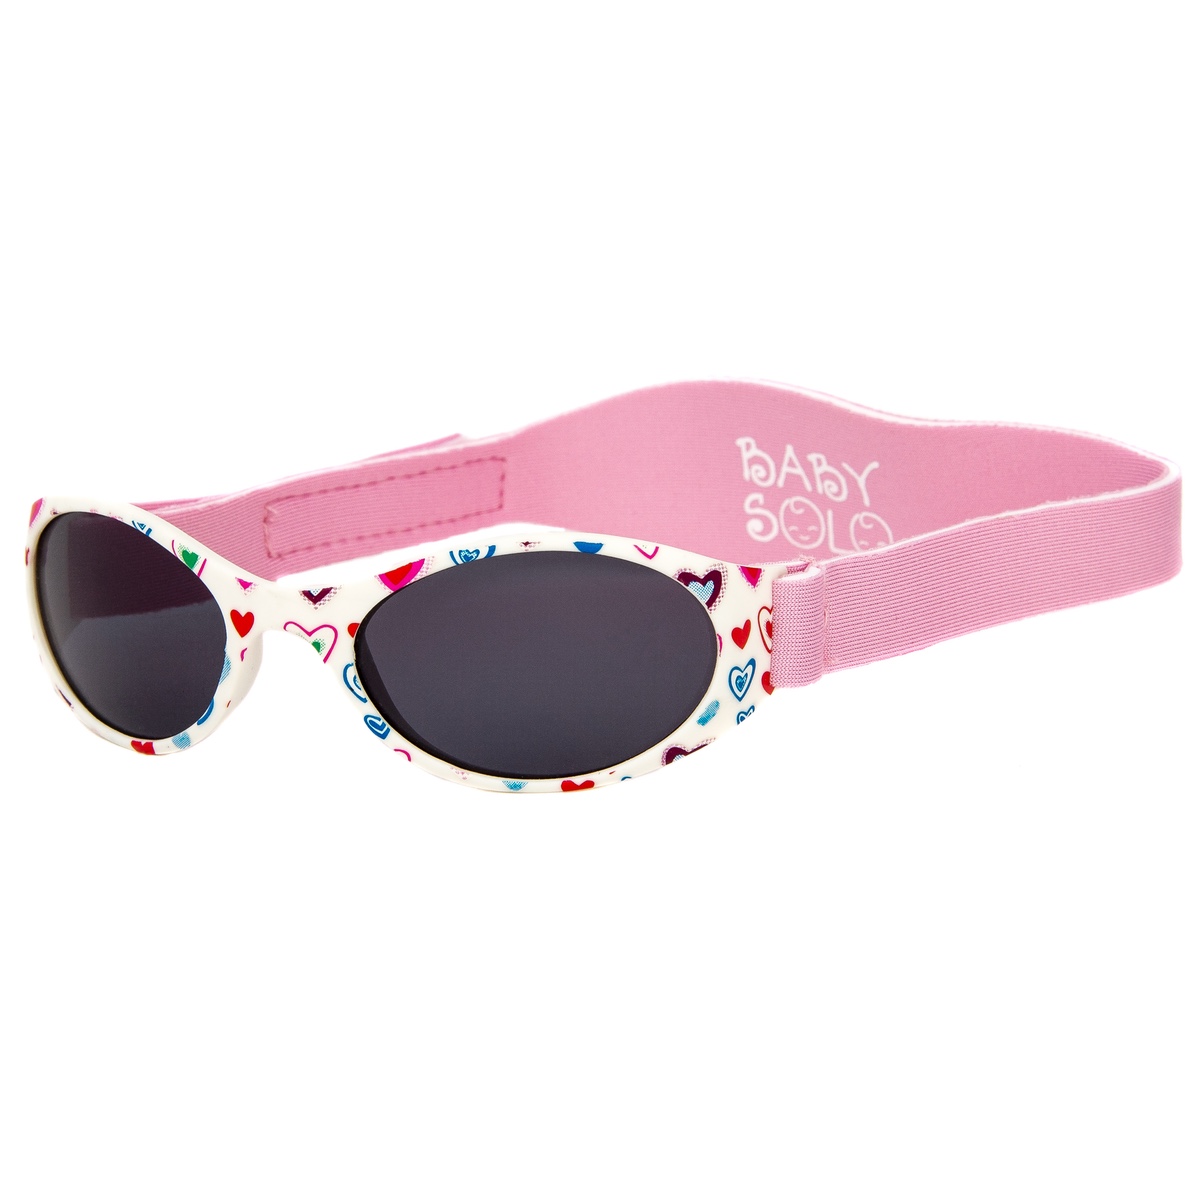 My Brittany's Pink Heart Glasses-FREE SHIPPING OVER $20